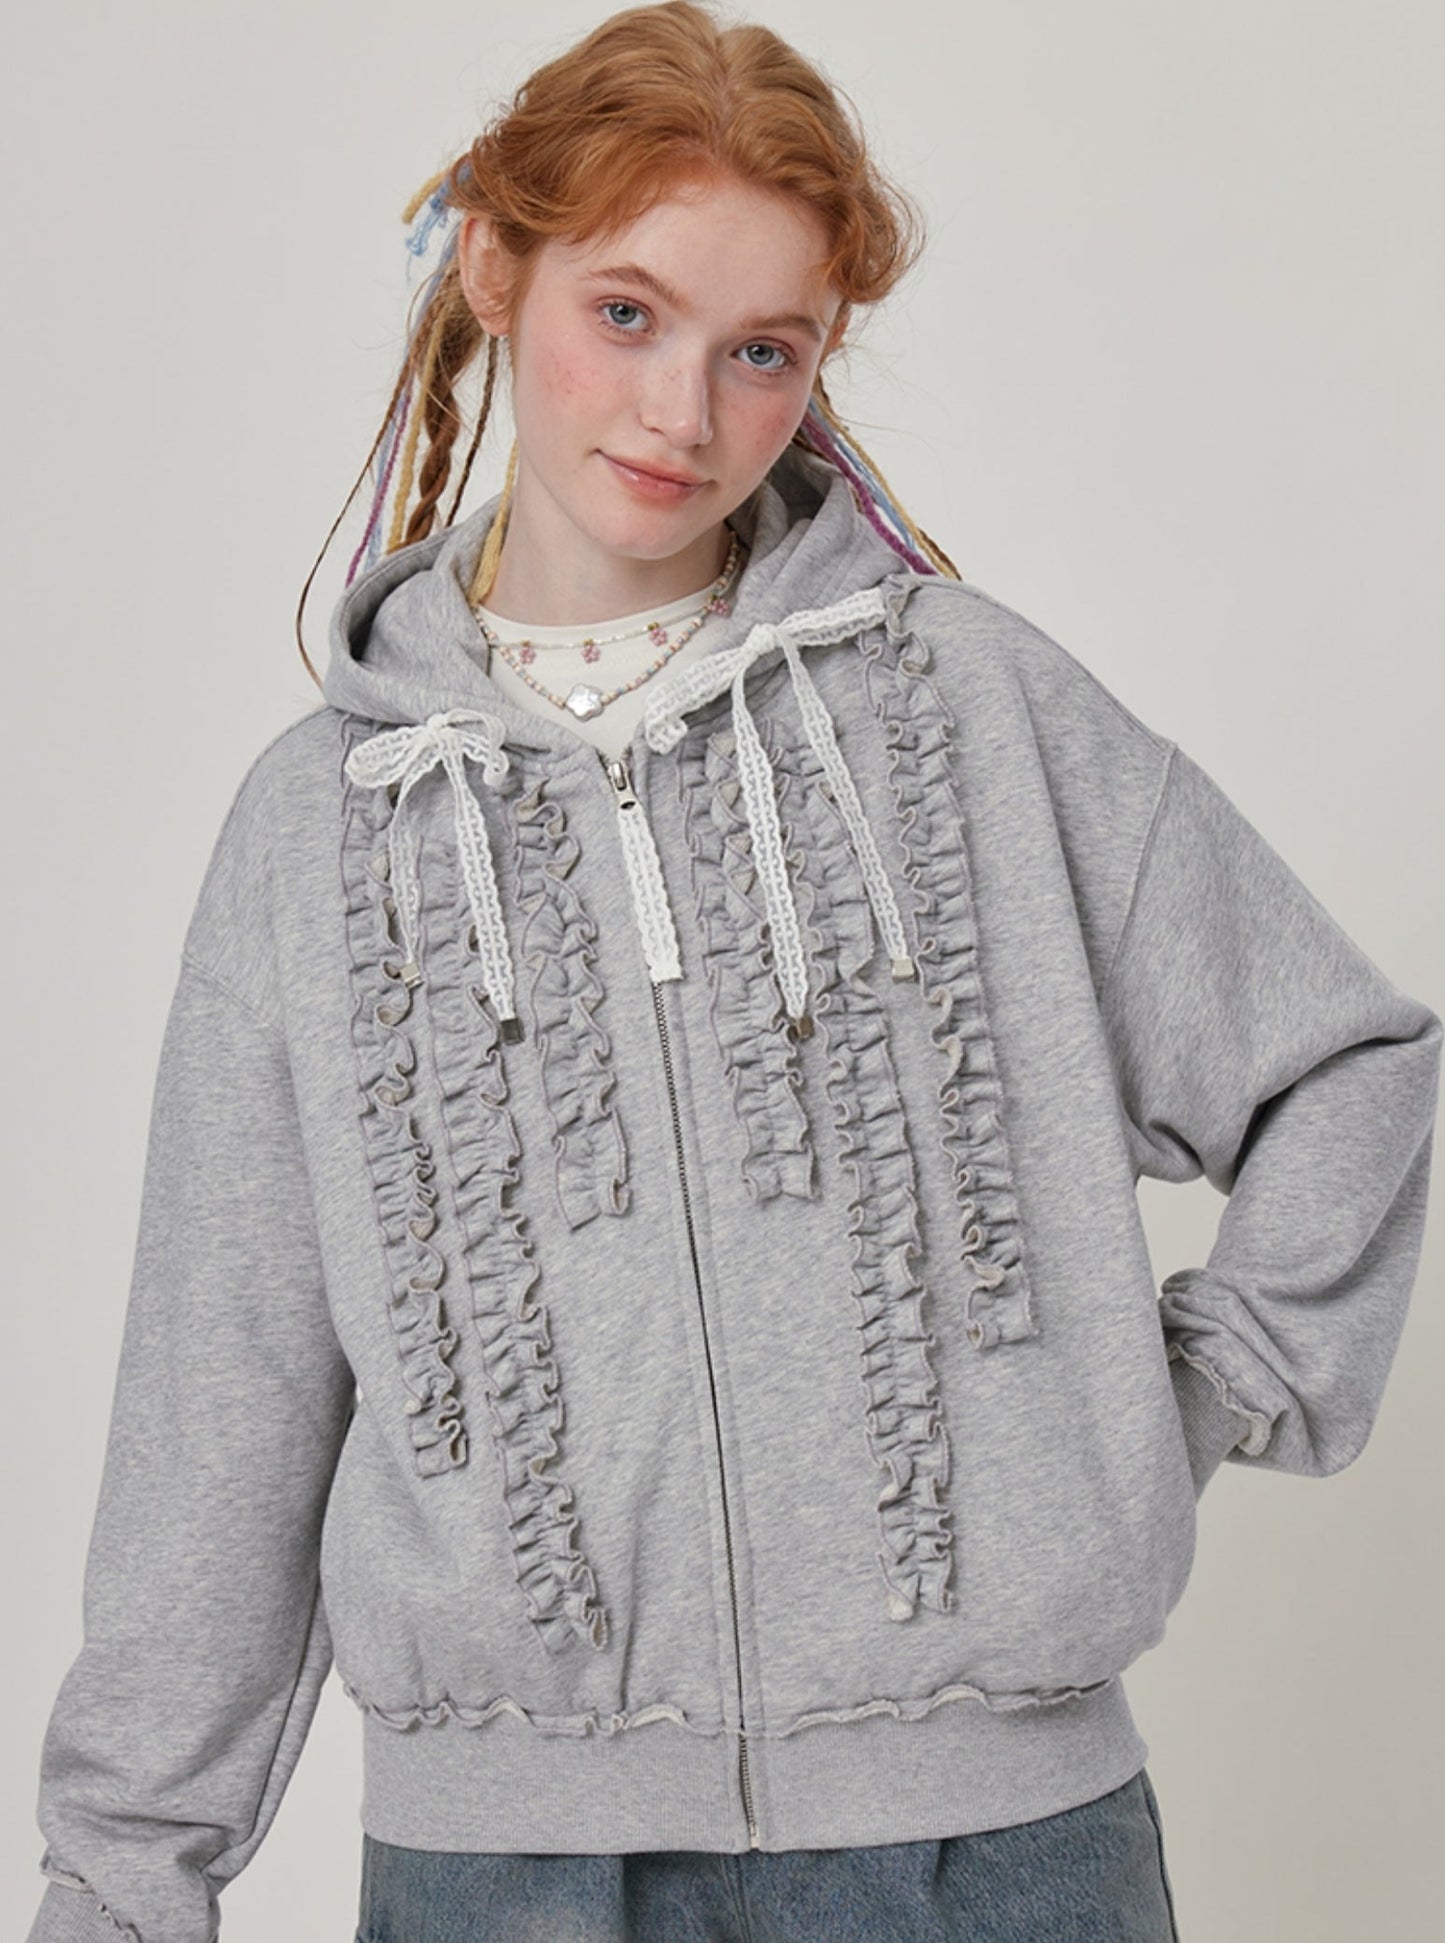 earring hooded knitted jacket